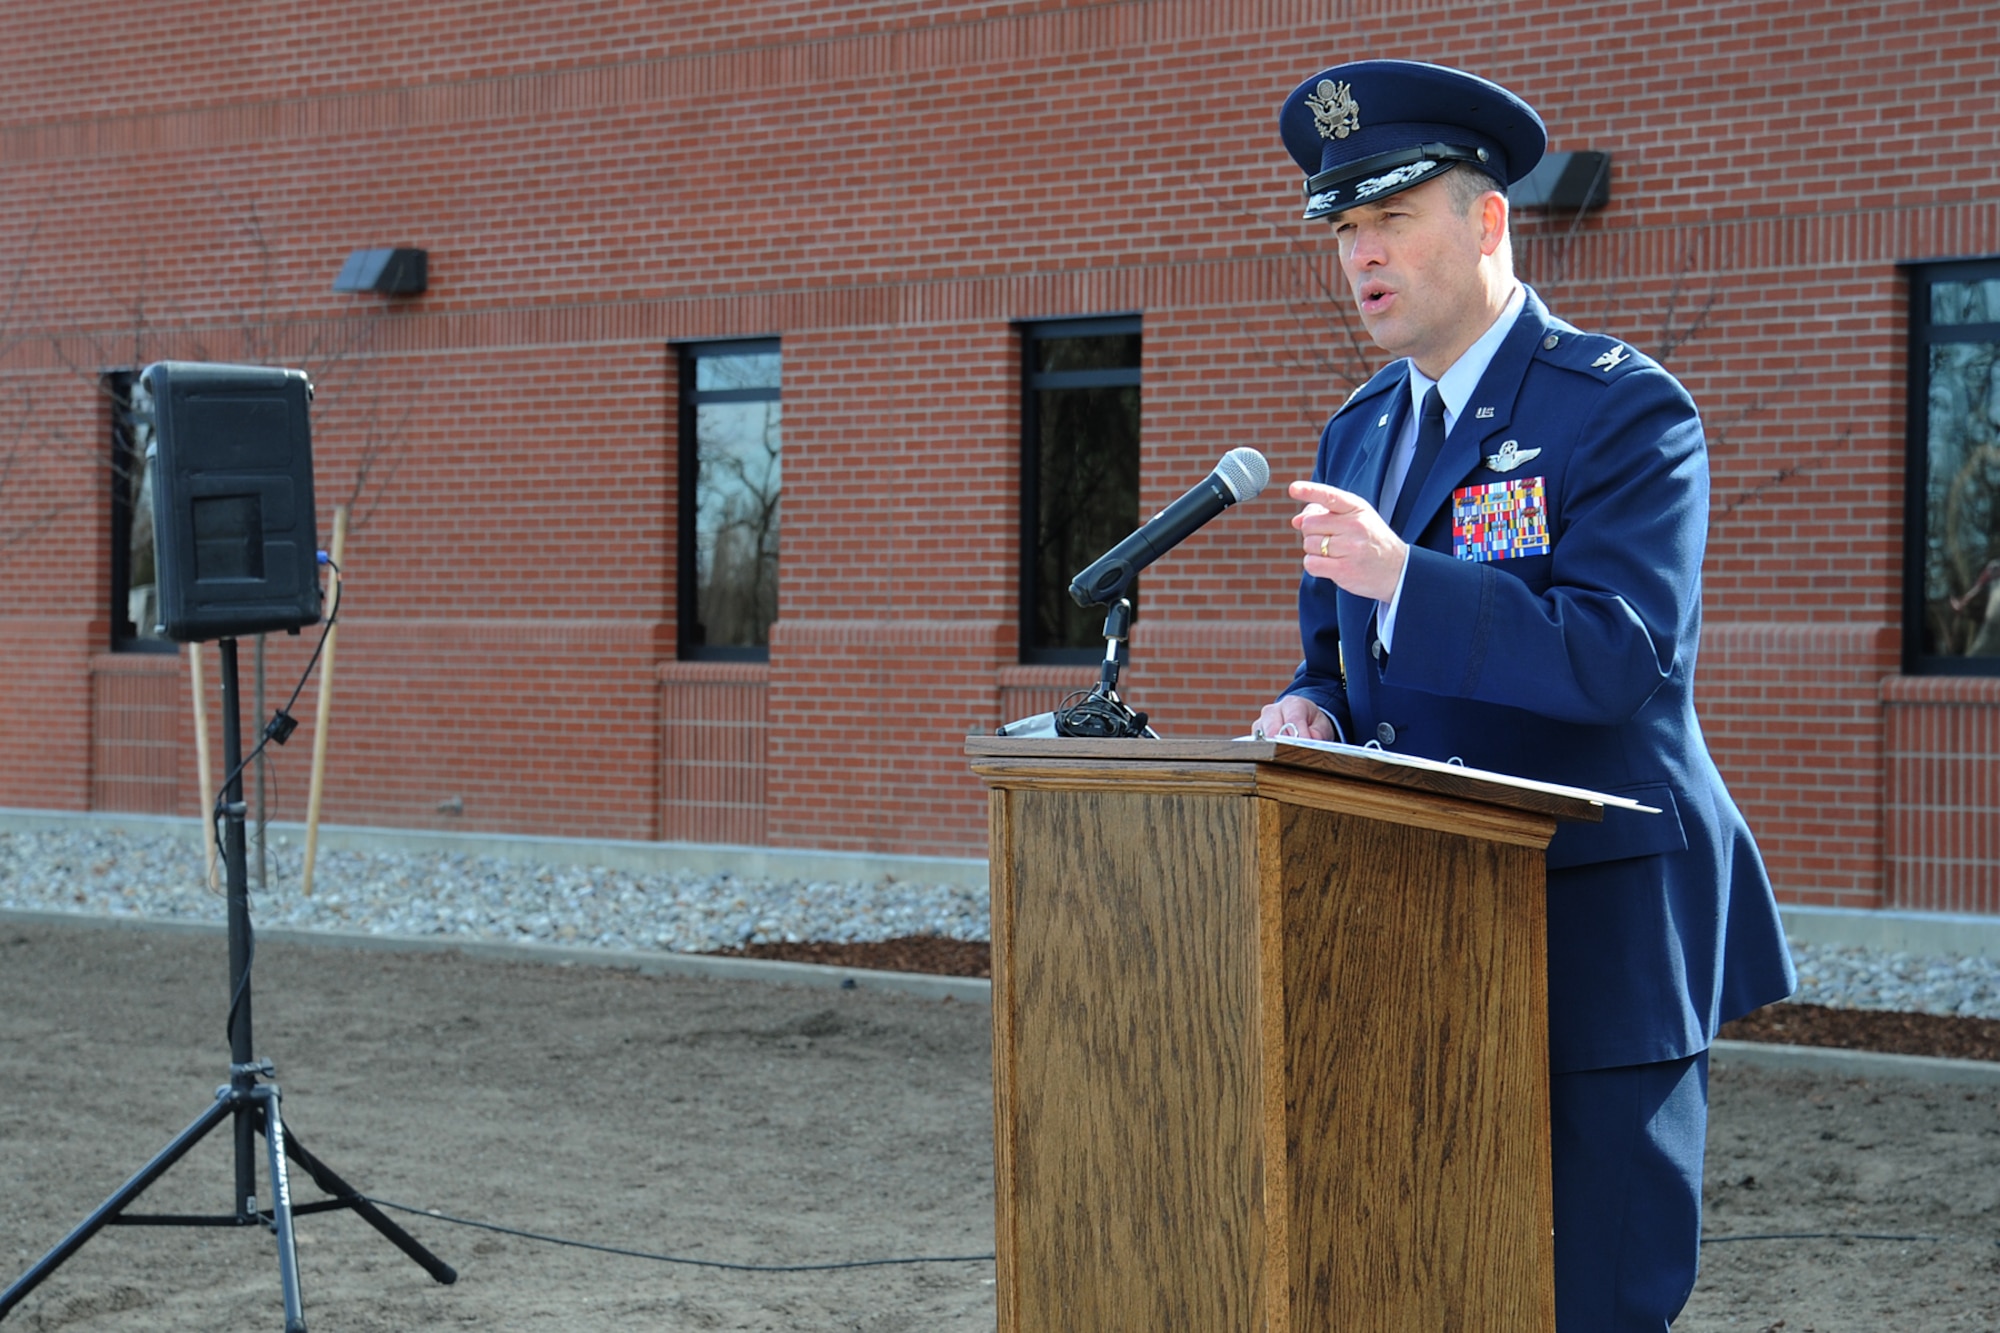 Col. Brian Newberry, 92nd Air Refueling Wing commander, thanks the people invovled in making the new headquarters happen during the ribbon cutting ceremony at Fairchild Air Force Base, Wash., March 20, 2014. The ribbon cutting signifies the opening of a new chapter for generations of Airmen to come. (U.S. Air Force photo by Airman 1st Class Janelle Patiño/Released)